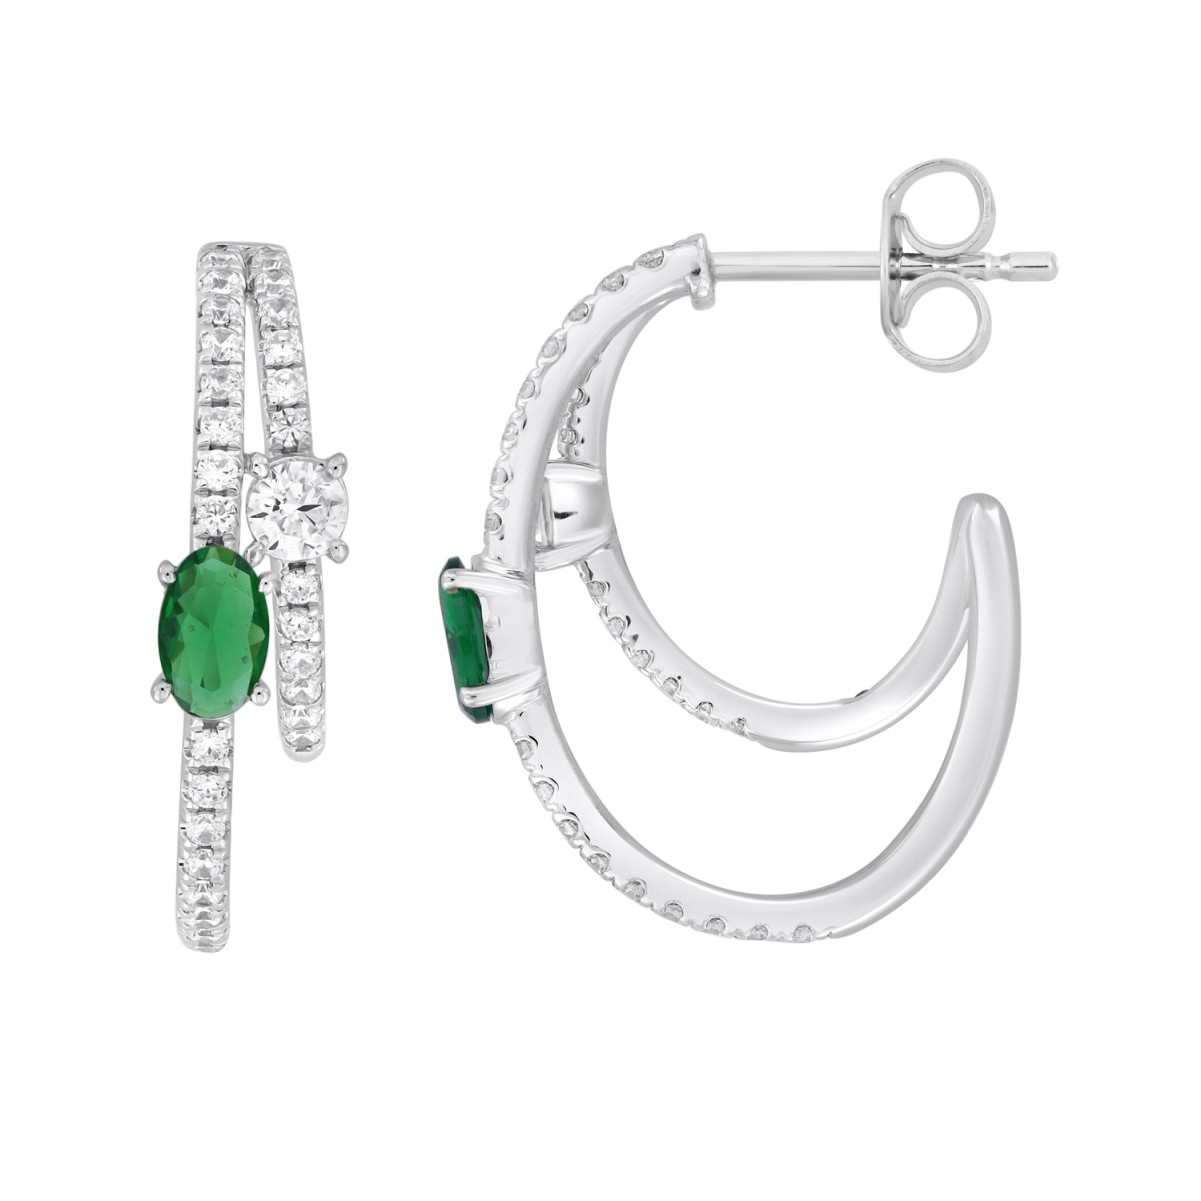 14K WHITE GOLD 2CT ROUND/OVAL DIAMOND LADIES EARRINGS(COLOR STONE OVAL GREEN EMERALD DIAMOND 1CT)